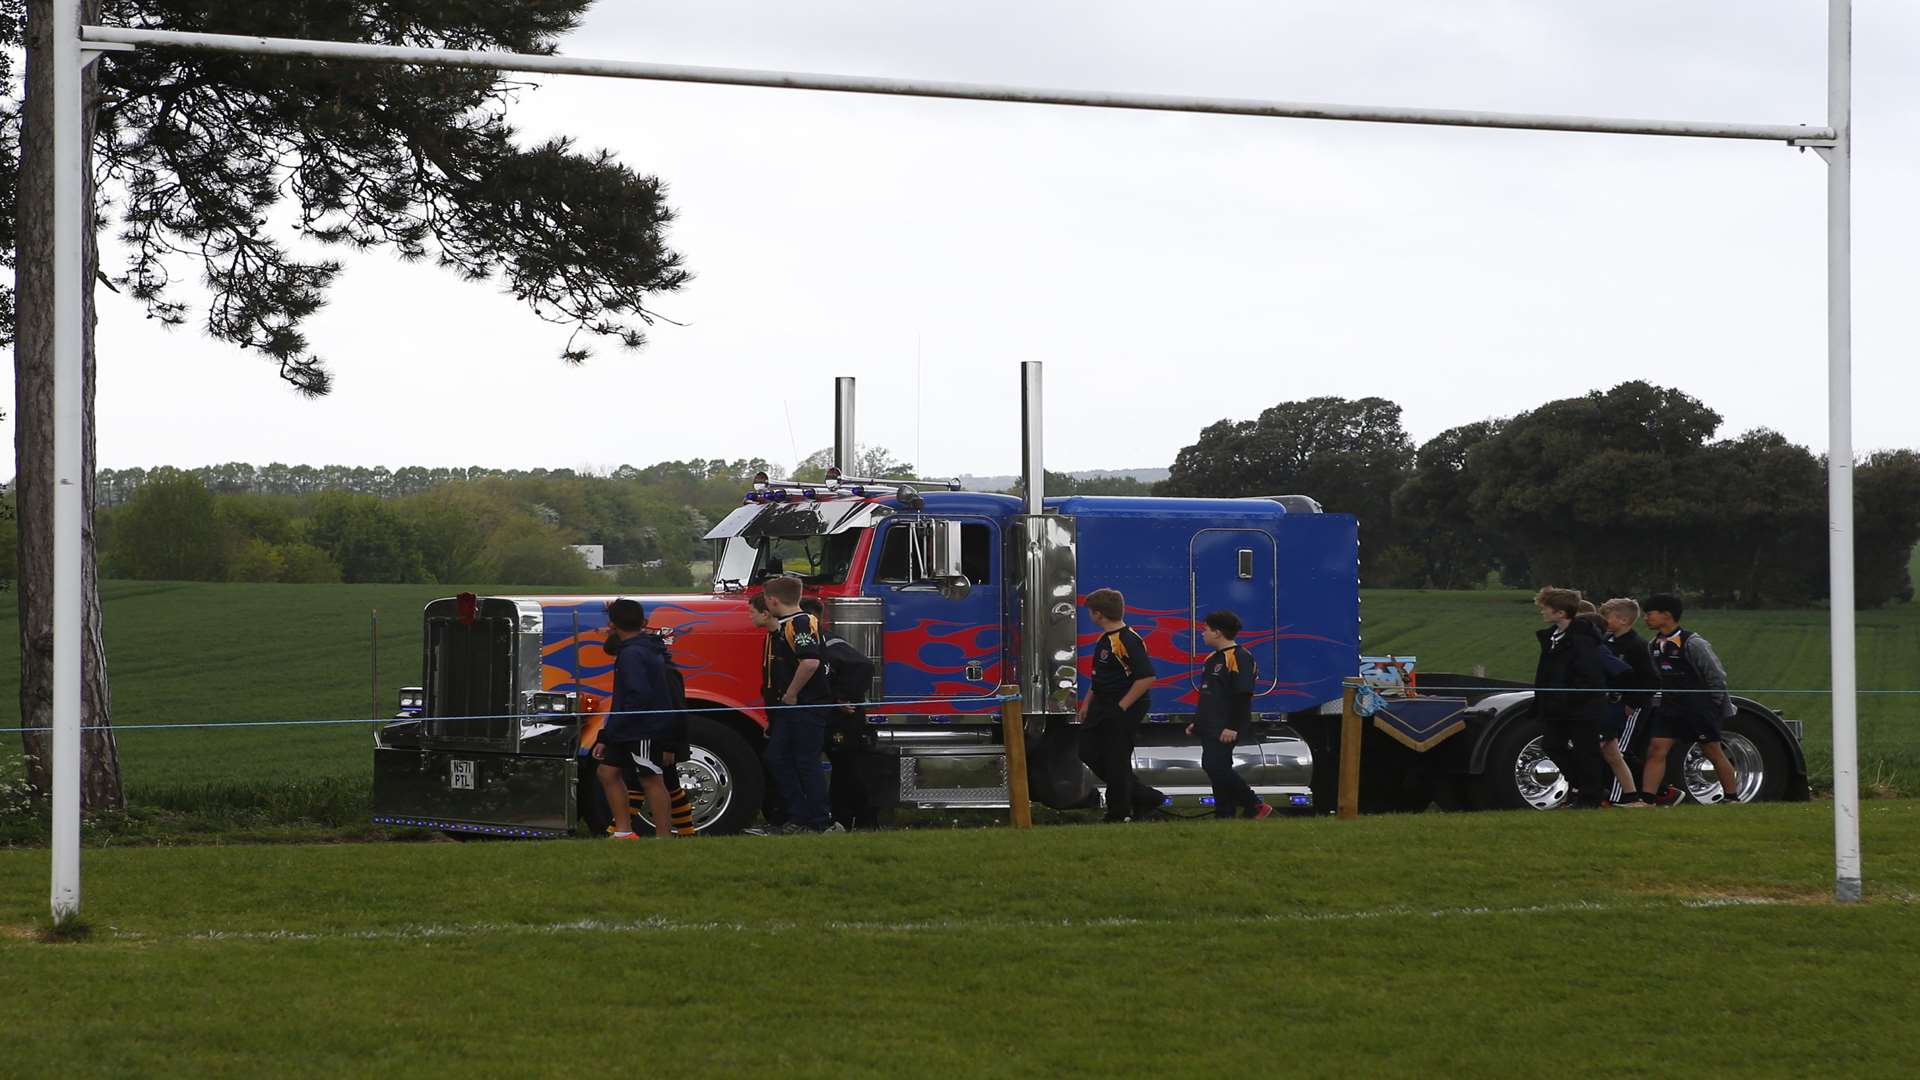 The Optimus Prime hearse did a lap of the field at Canterbury Rugby Club